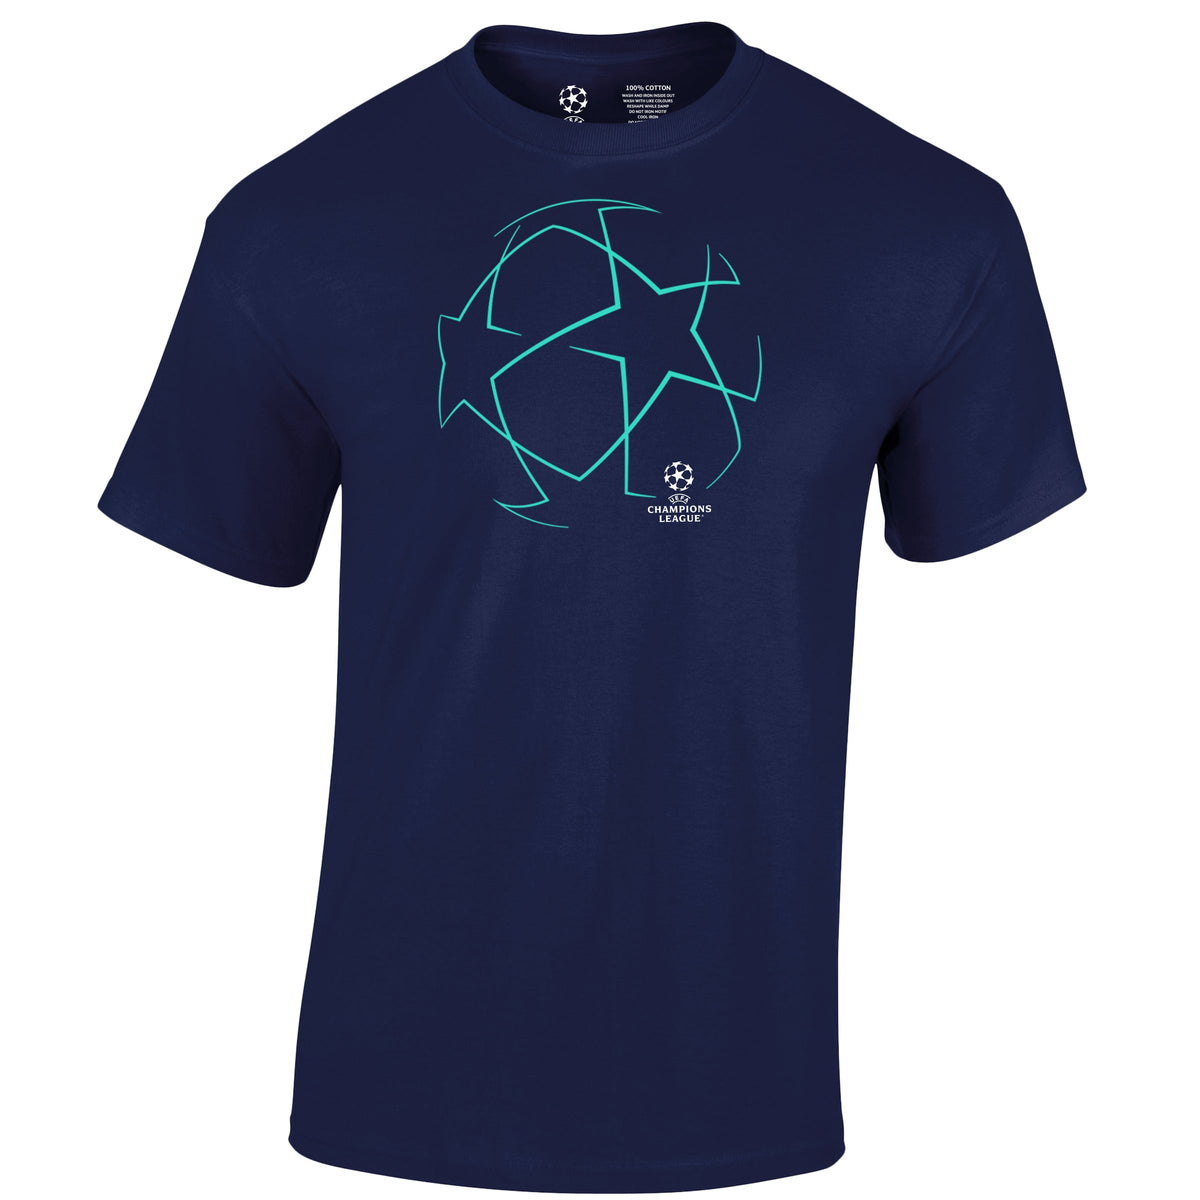 Champions League Starball T-Shirt Navy